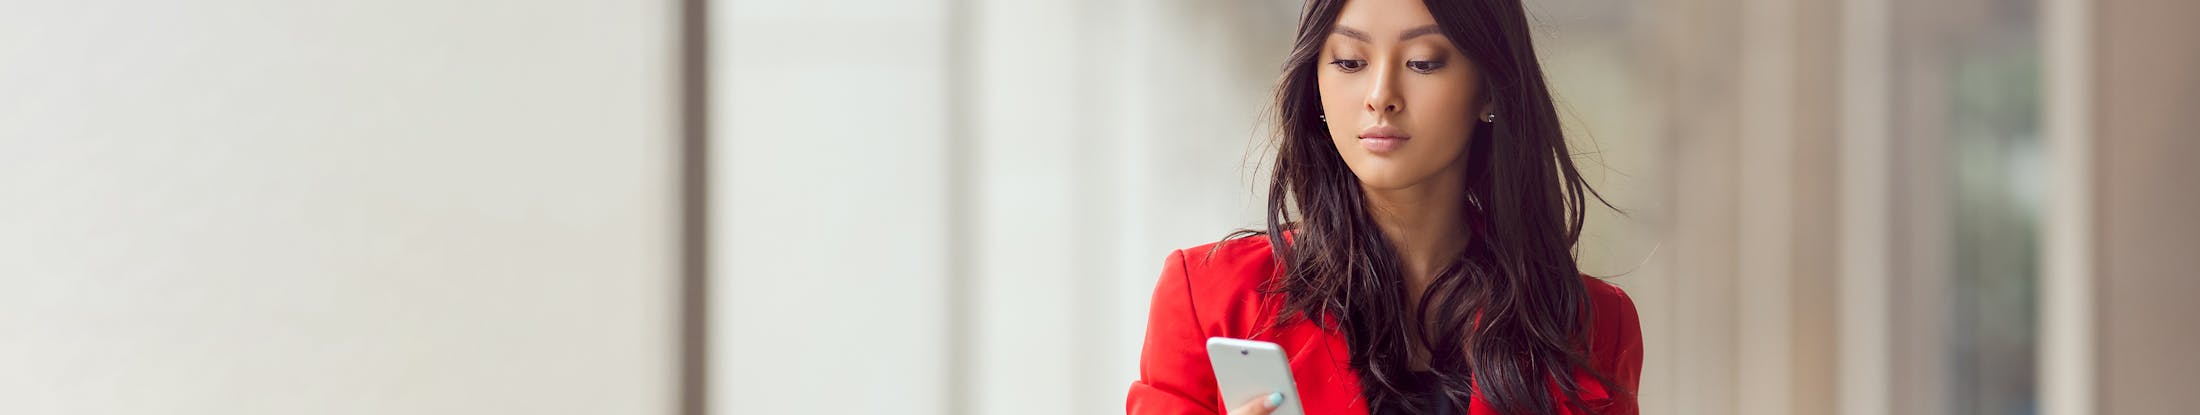 a woman with dark hair looking at her phone wearing a red blazer